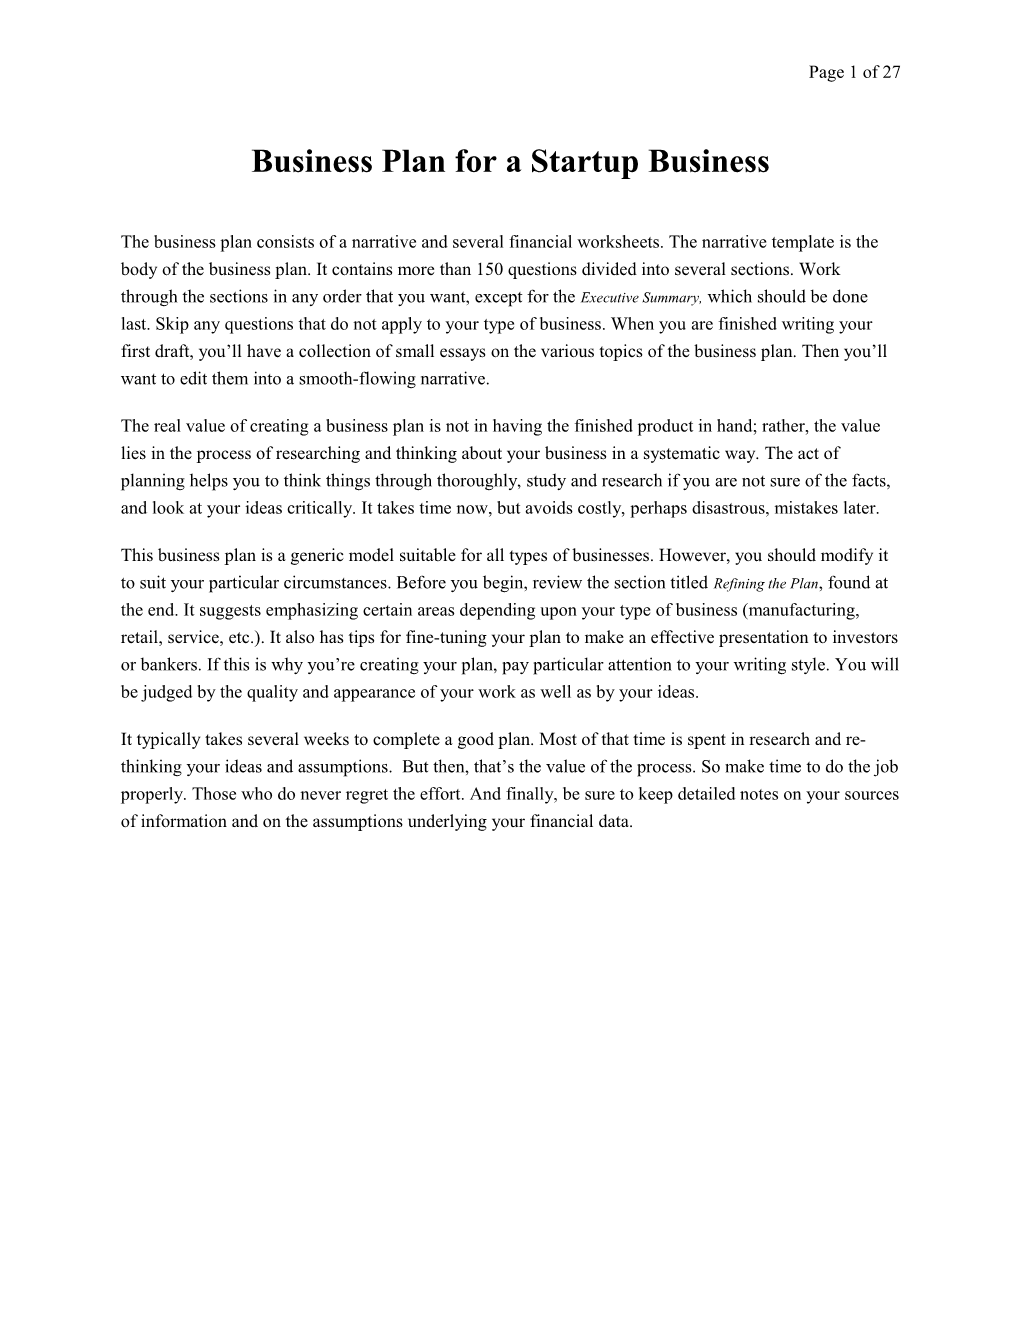 Business Plan for a Startup Business s4